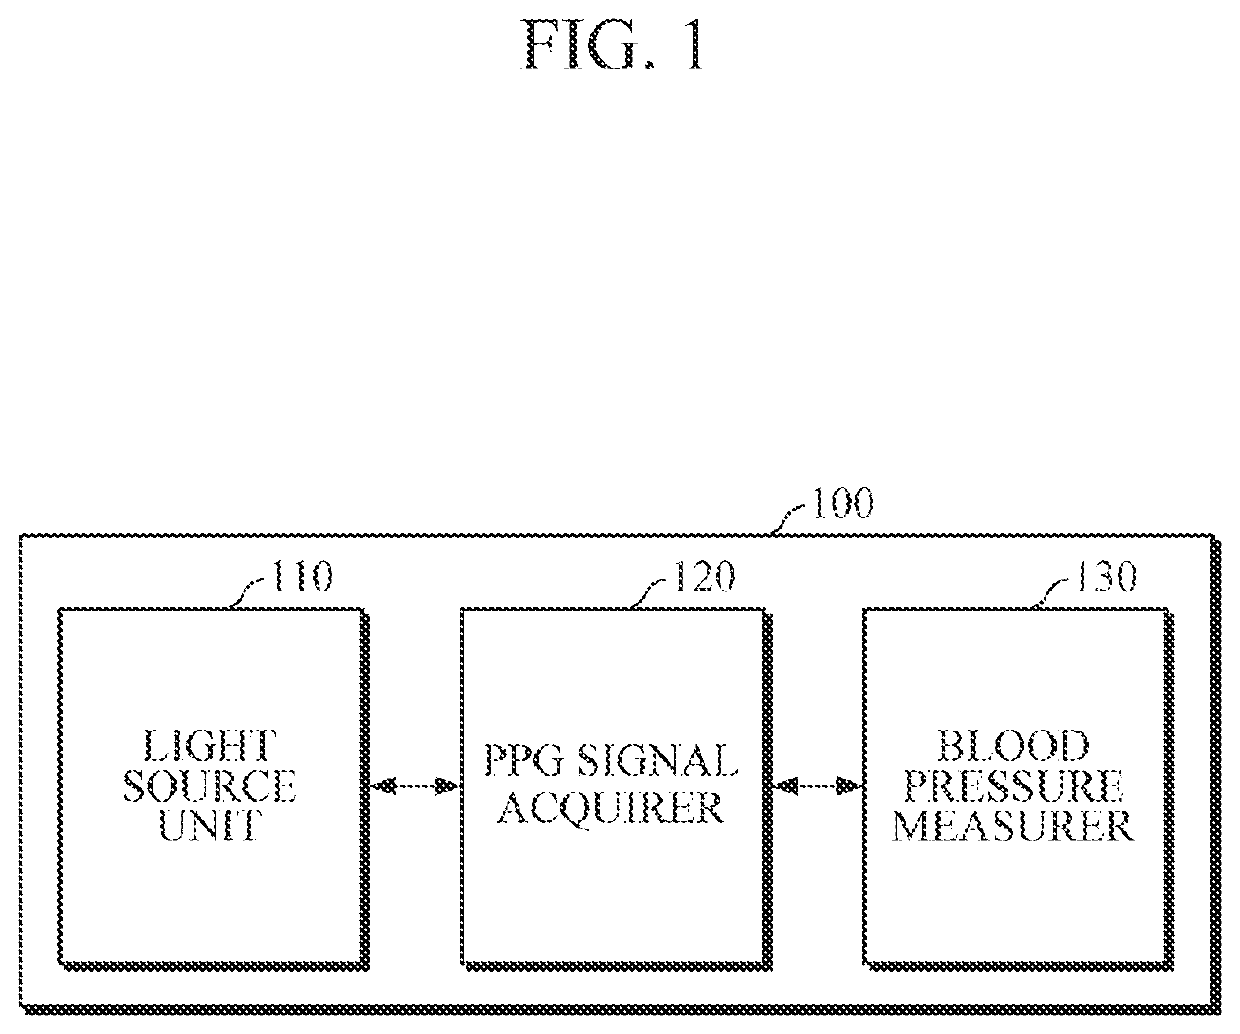 Blood pressure measuring apparatus, and blood pressure measuring apparatus using light source selection process